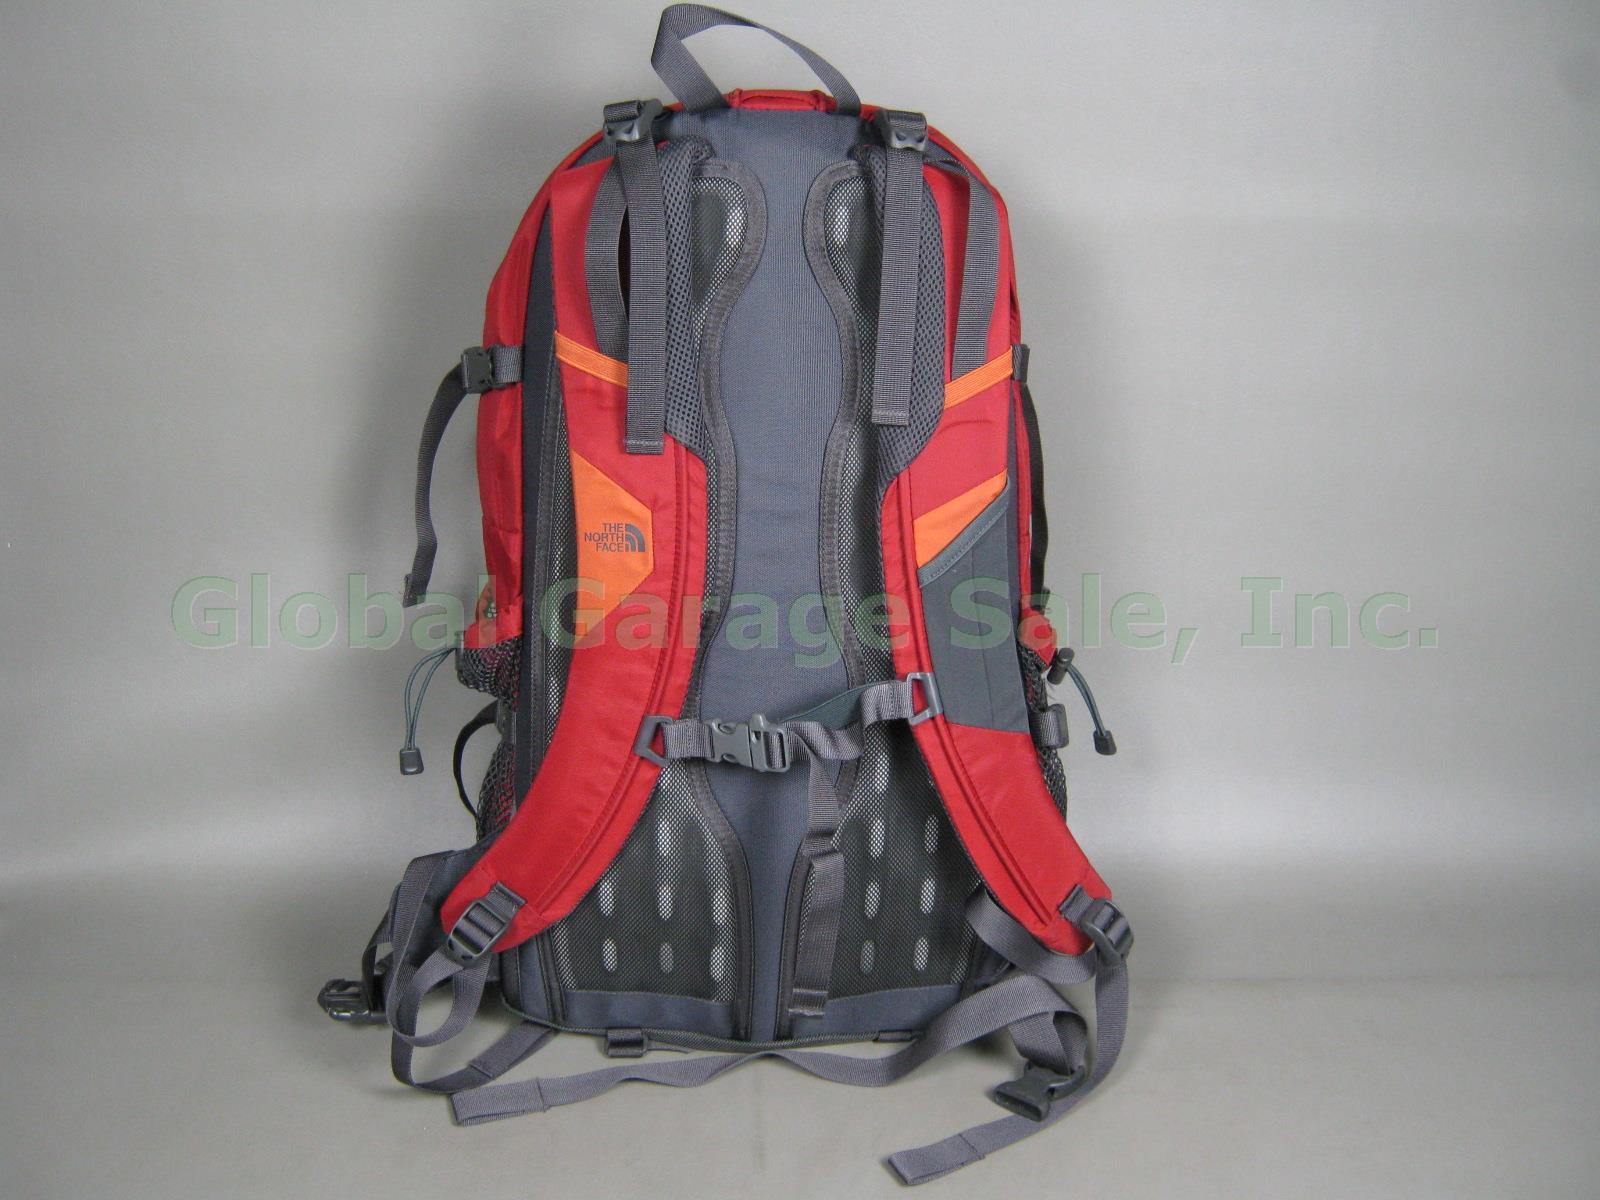 NEW NWT The North Face Big Shot Backpack Day Pack Laptop Book Bag Cardinal Red 5